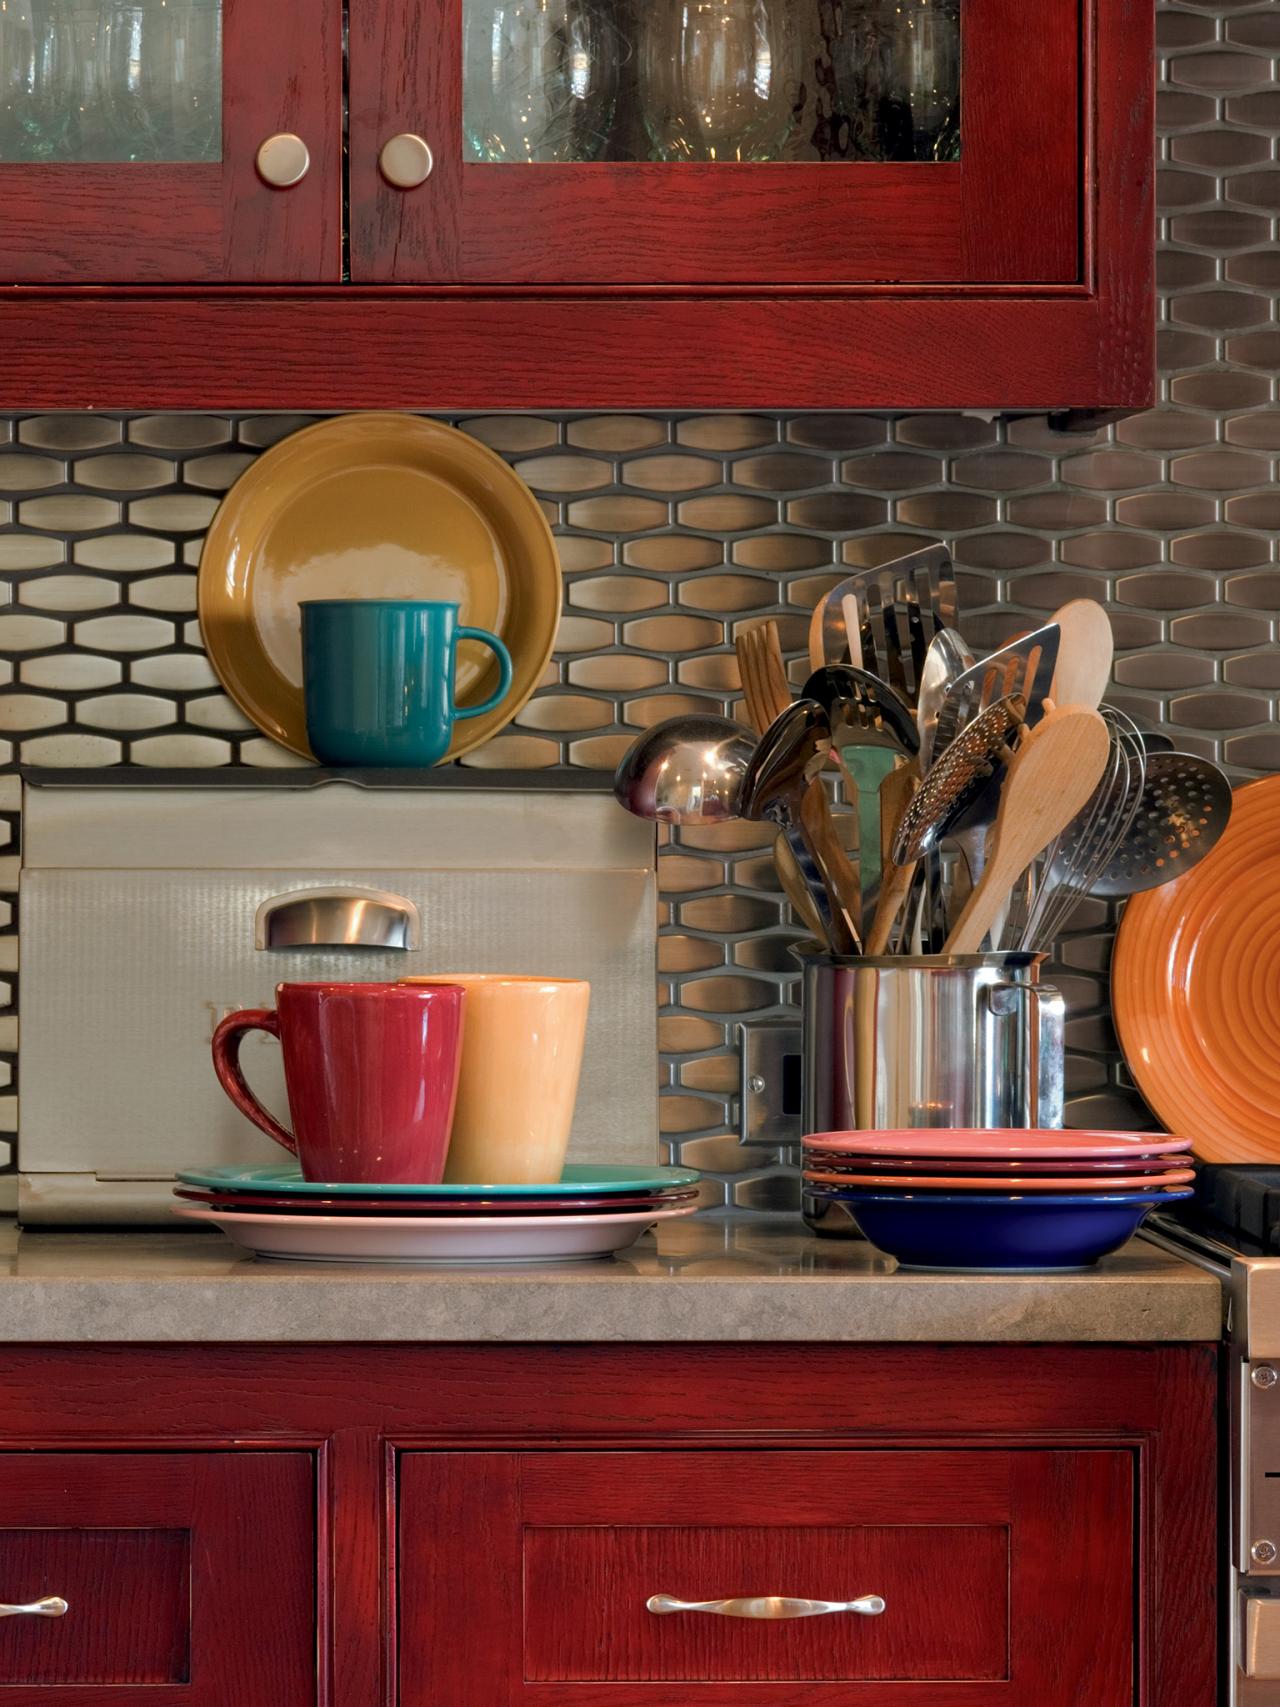 CI-Farrow-And-Ball-The-Art-of-Color-pg244_red-cabinet-and-backsplash_3x4.jpg.rend.hgtvcom.1280.1707